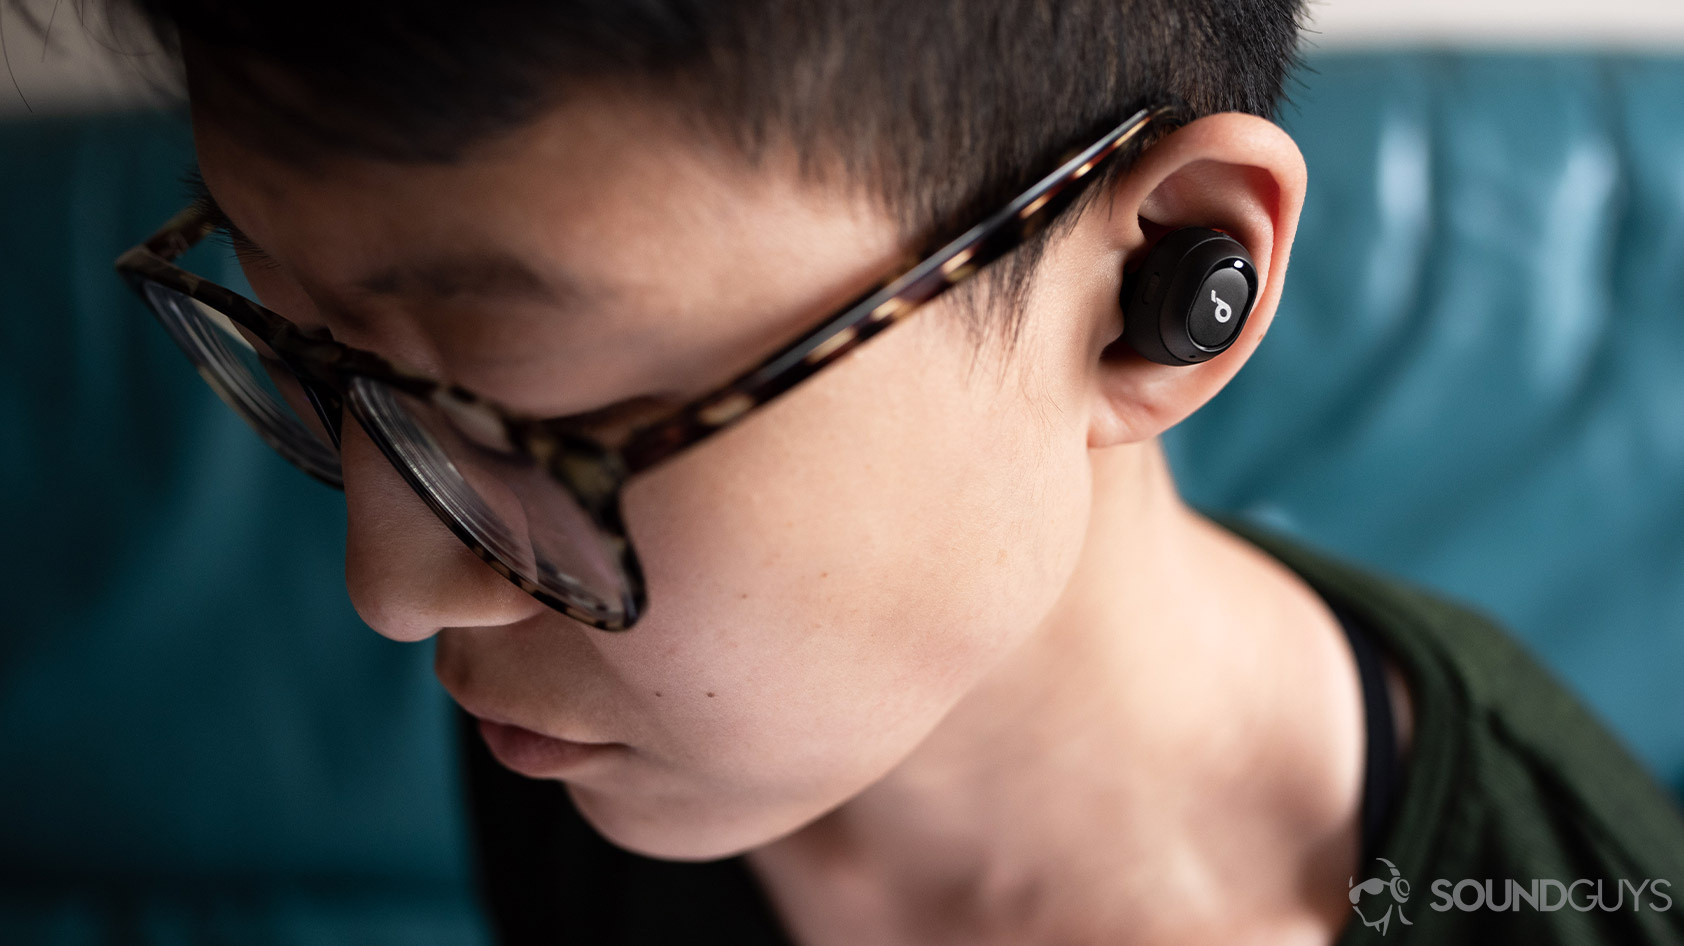 A picture of the Anker SoundCore Liberty Neo true wireless earbuds worn by a woman looking down.